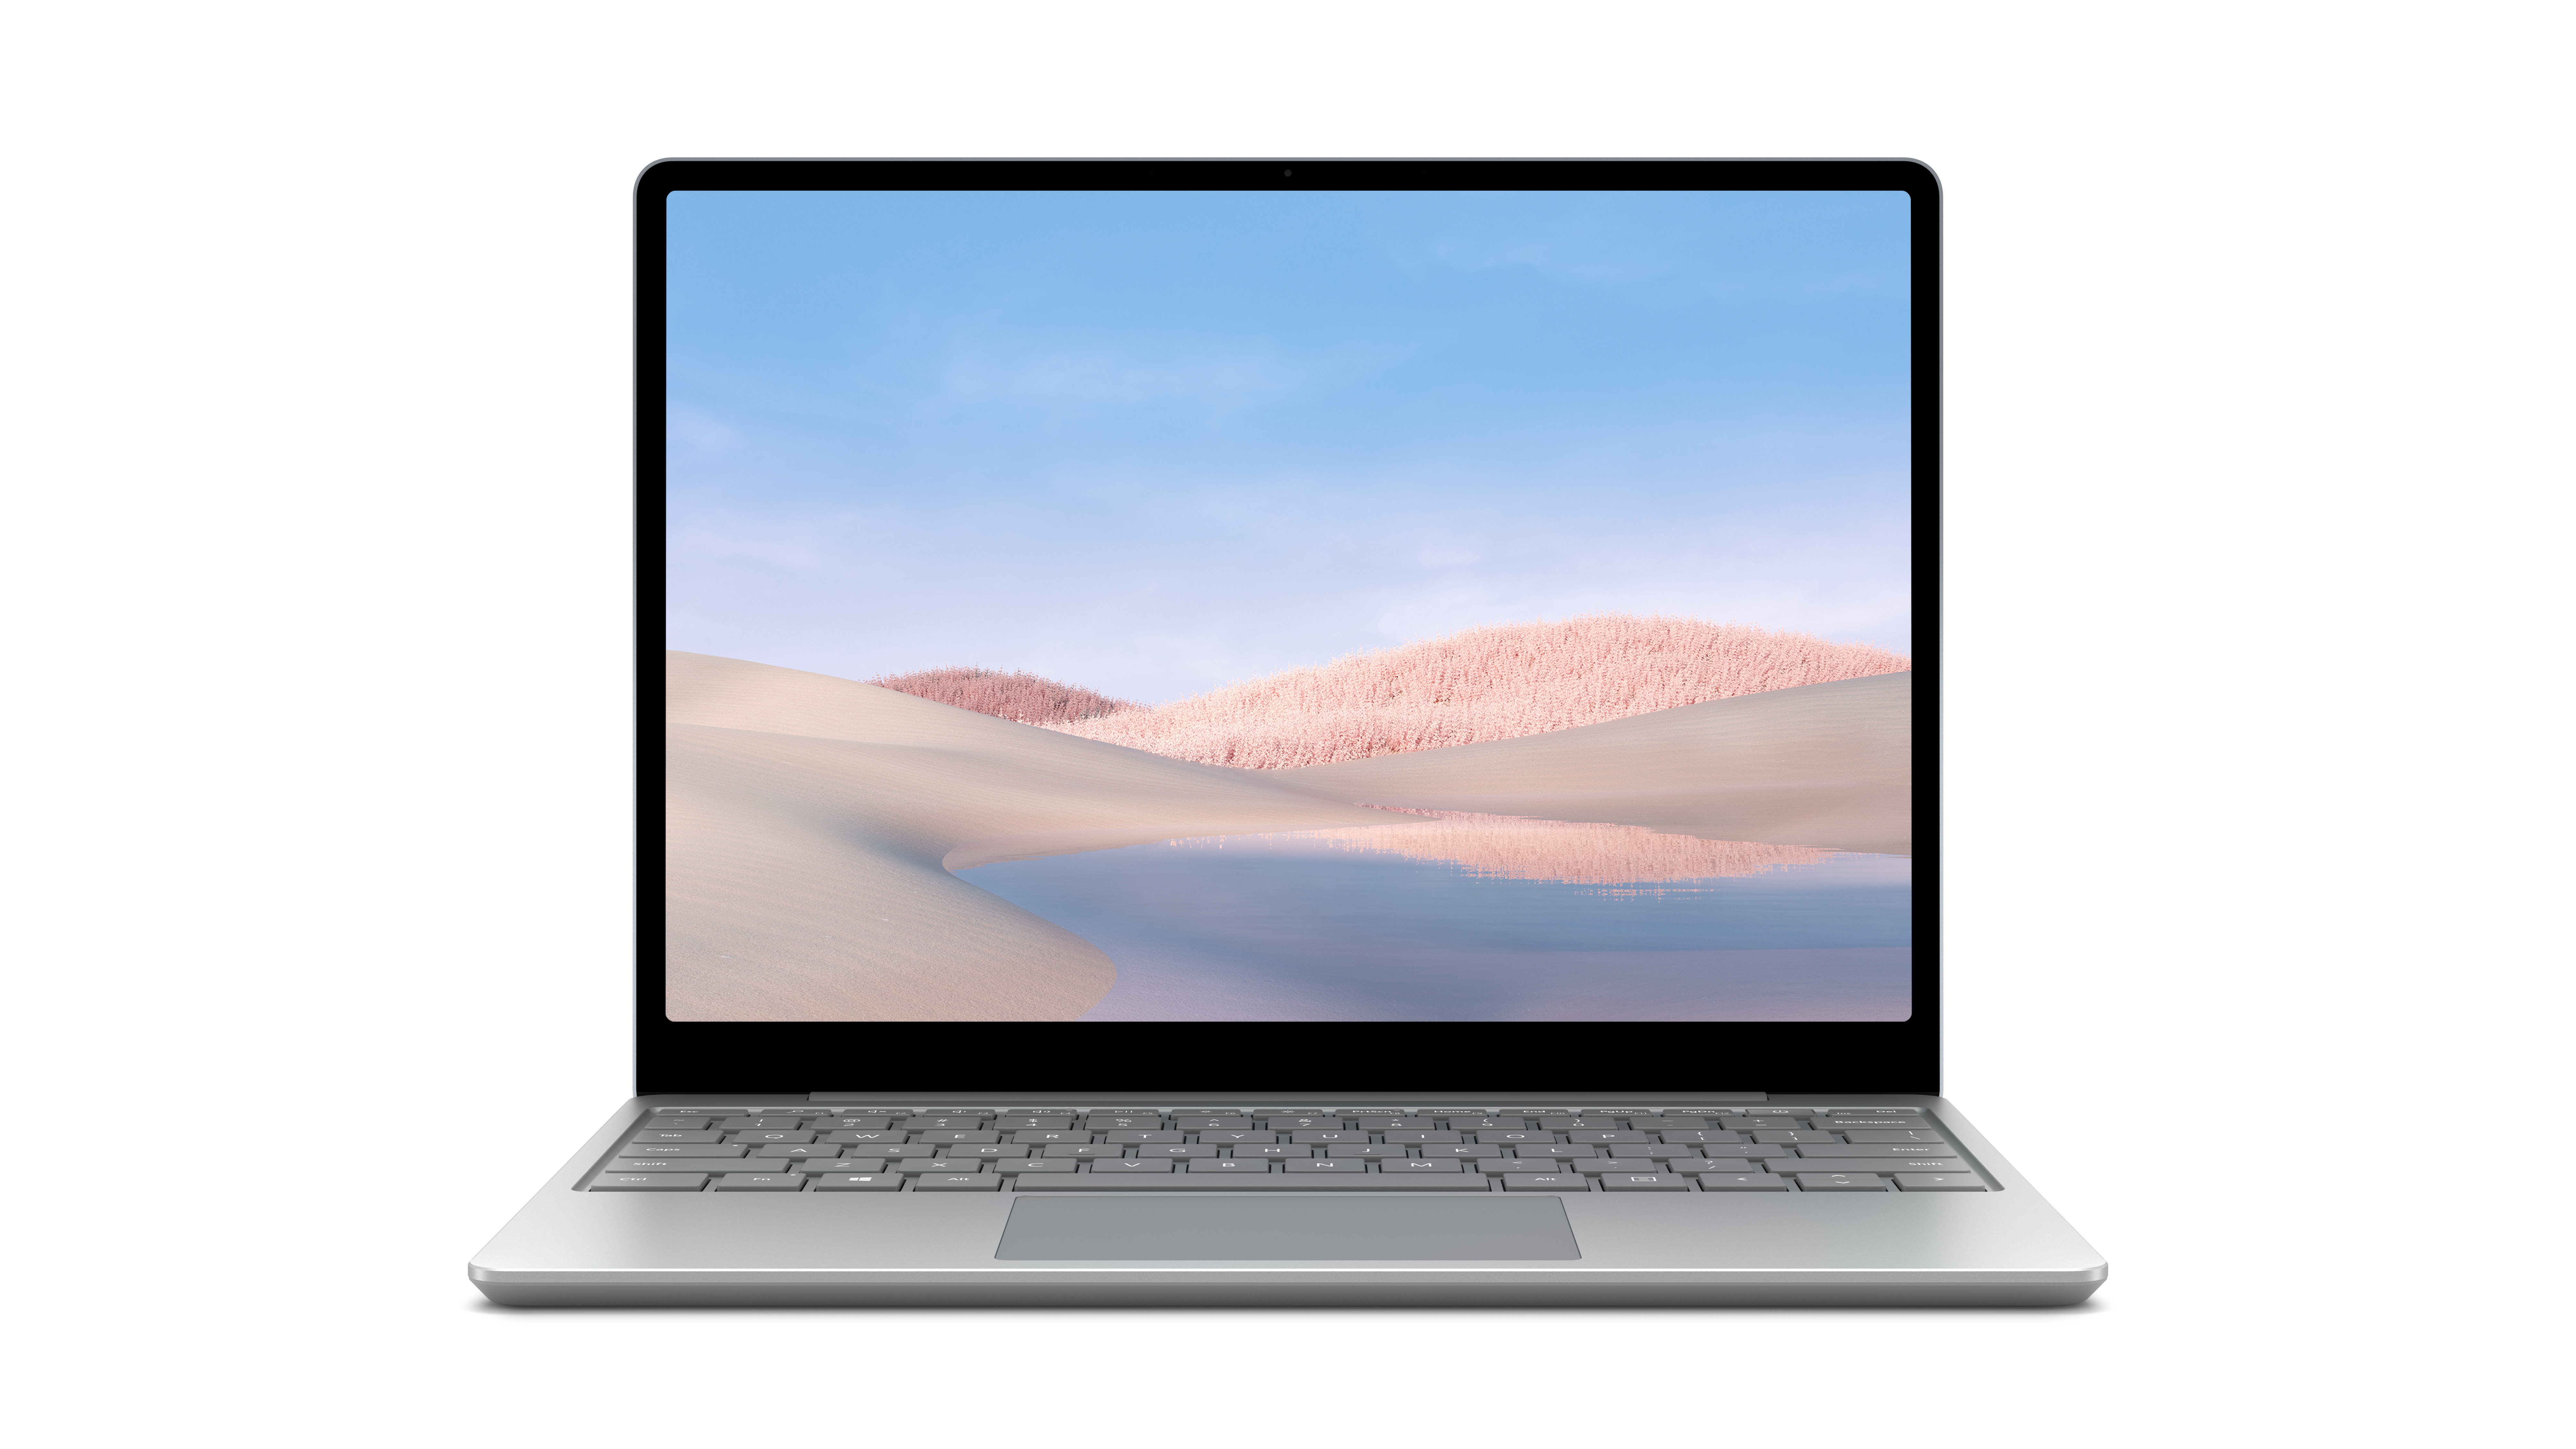 Microsoft Surface Laptop Go i5-1035G1 4GB 64GBeMMC 12.5 Touch W10 Home Platinum